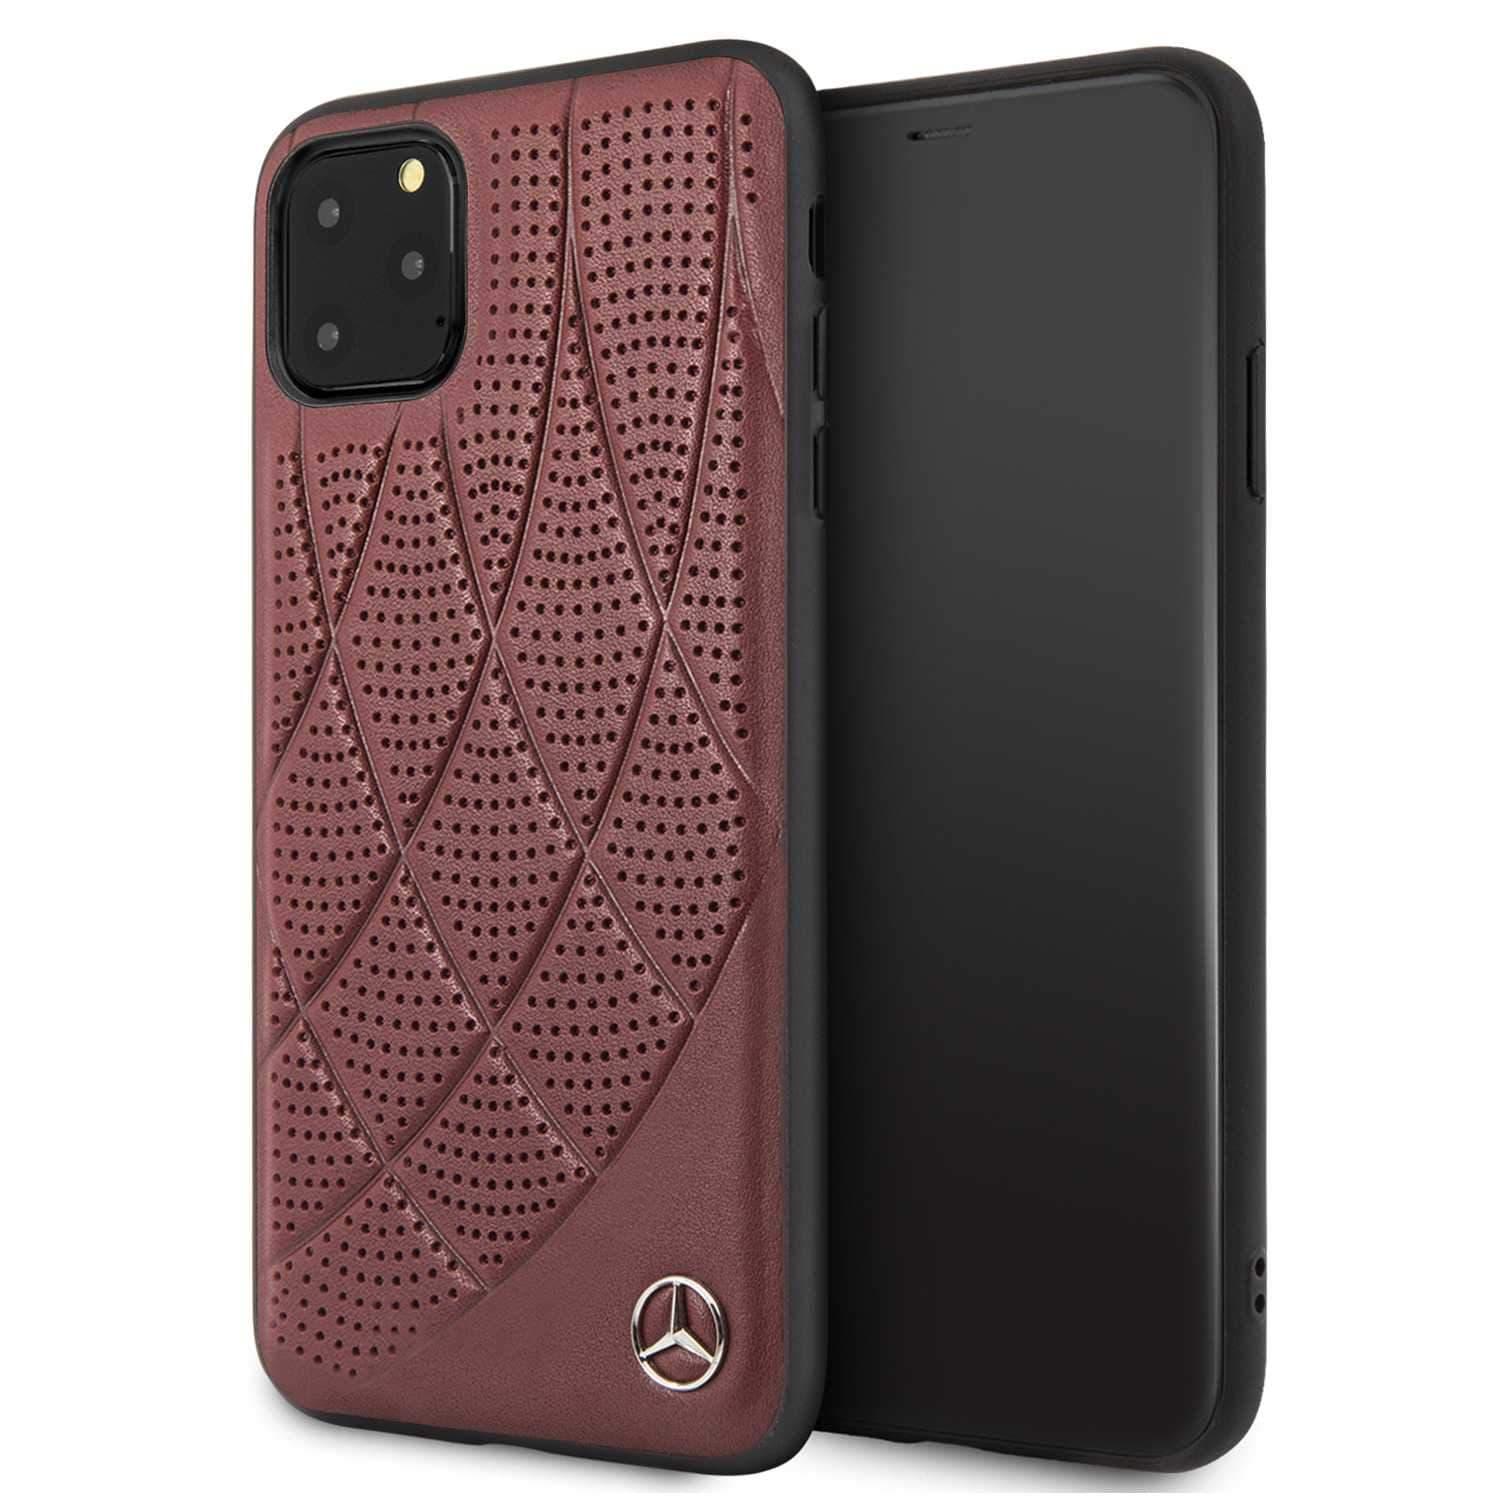 Mercedes-Benz mercedes hard case quilted perforated genuine leather iphone pro max burgundy